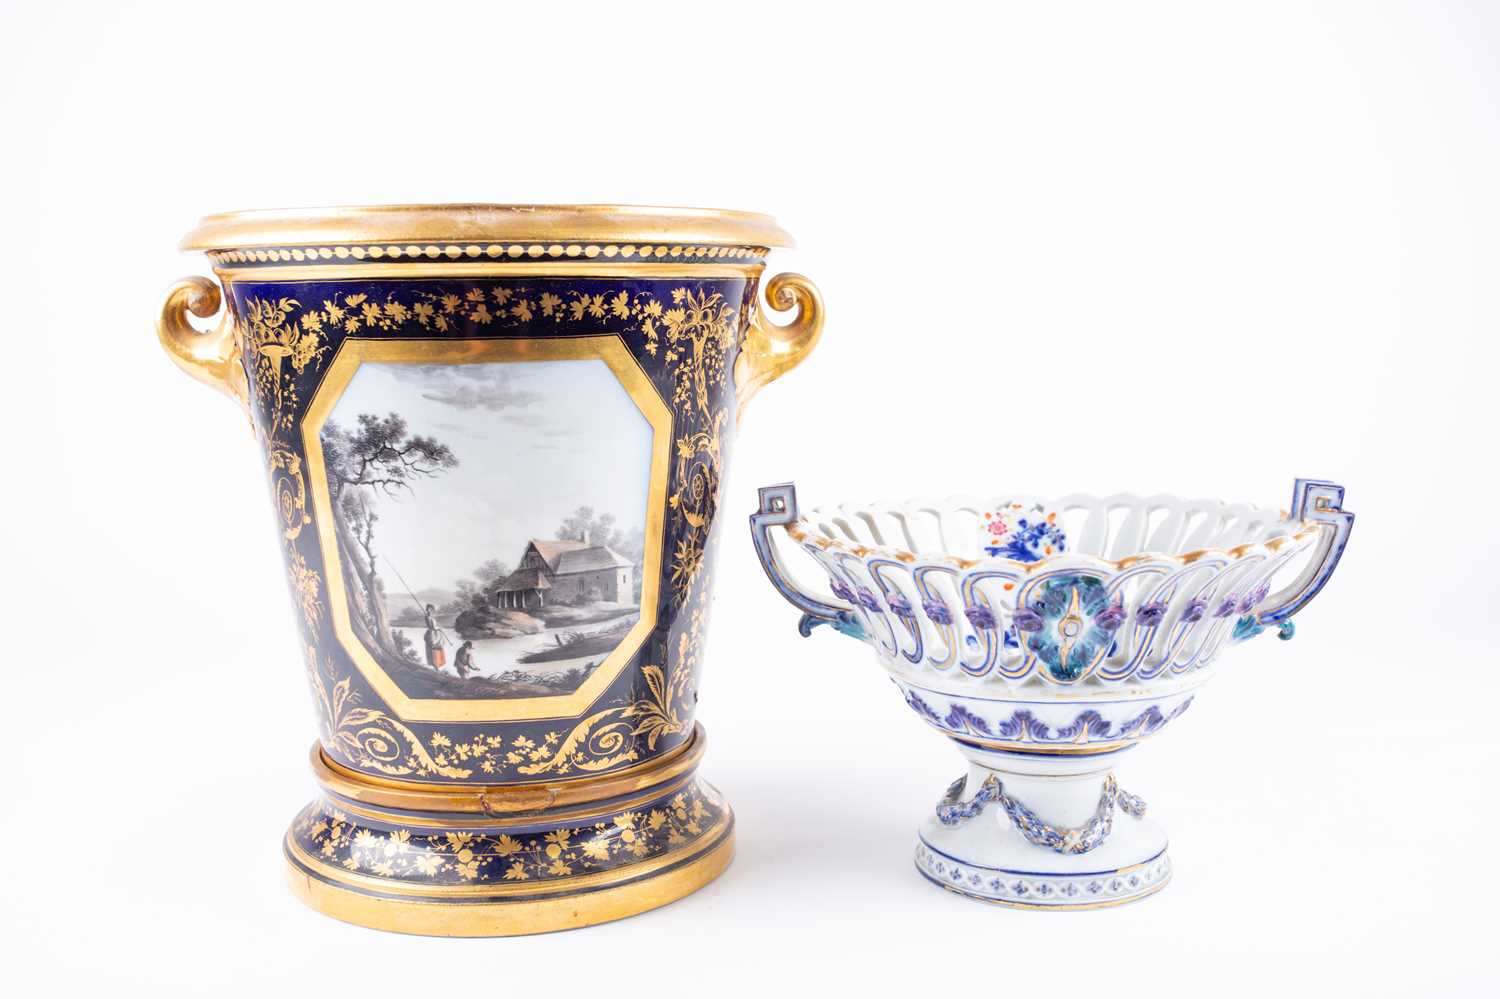 A 19th century porcelain blue and gilt vase, possibley Derby, with painted panels flowers and a - Image 4 of 5